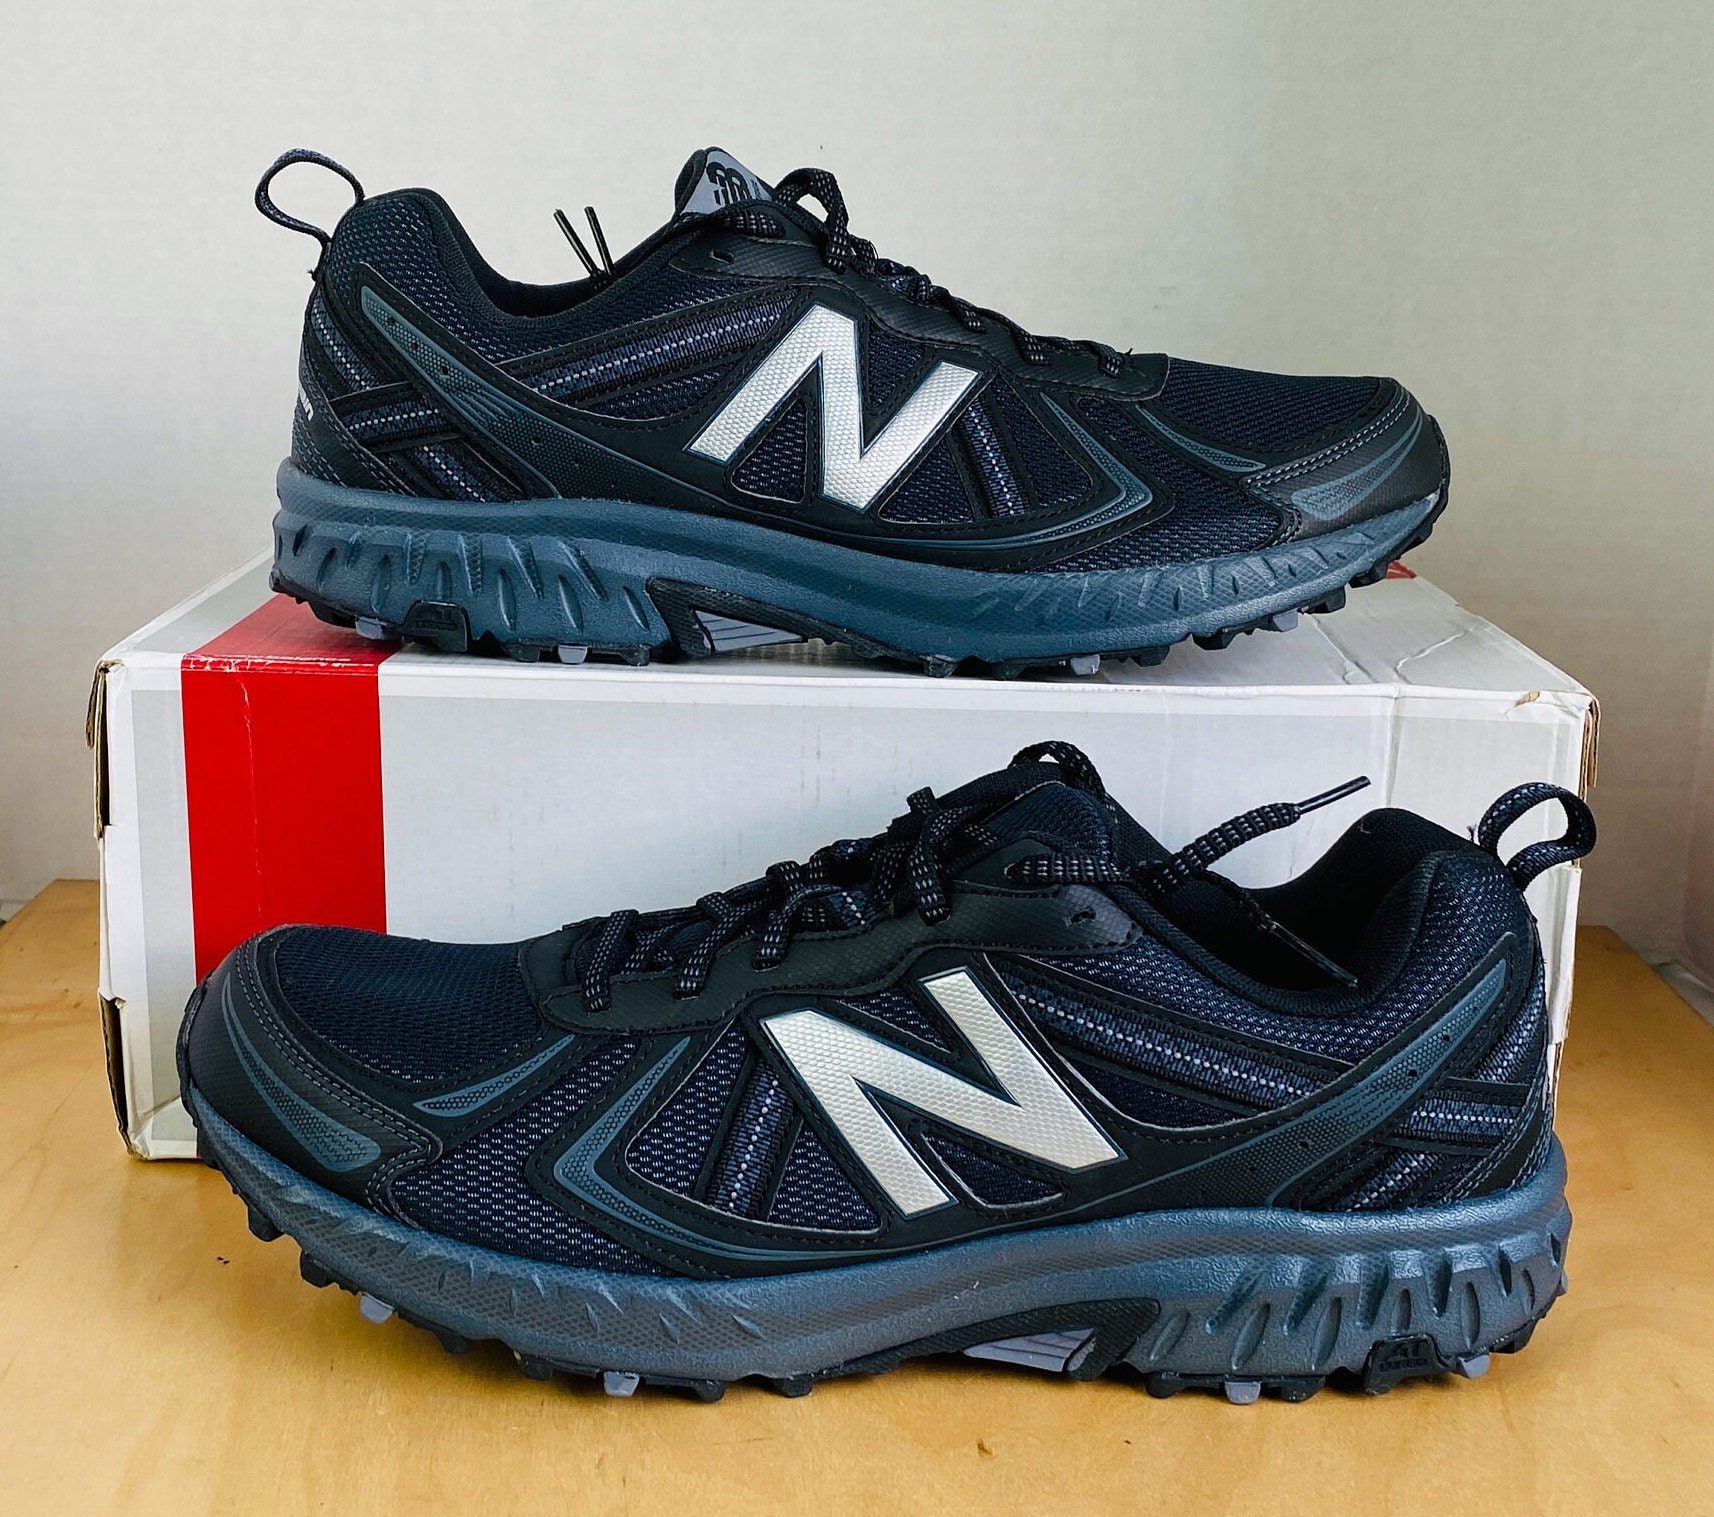 New Balance, Shoes, Vintage New Balance 745 Distressed Running Shoes